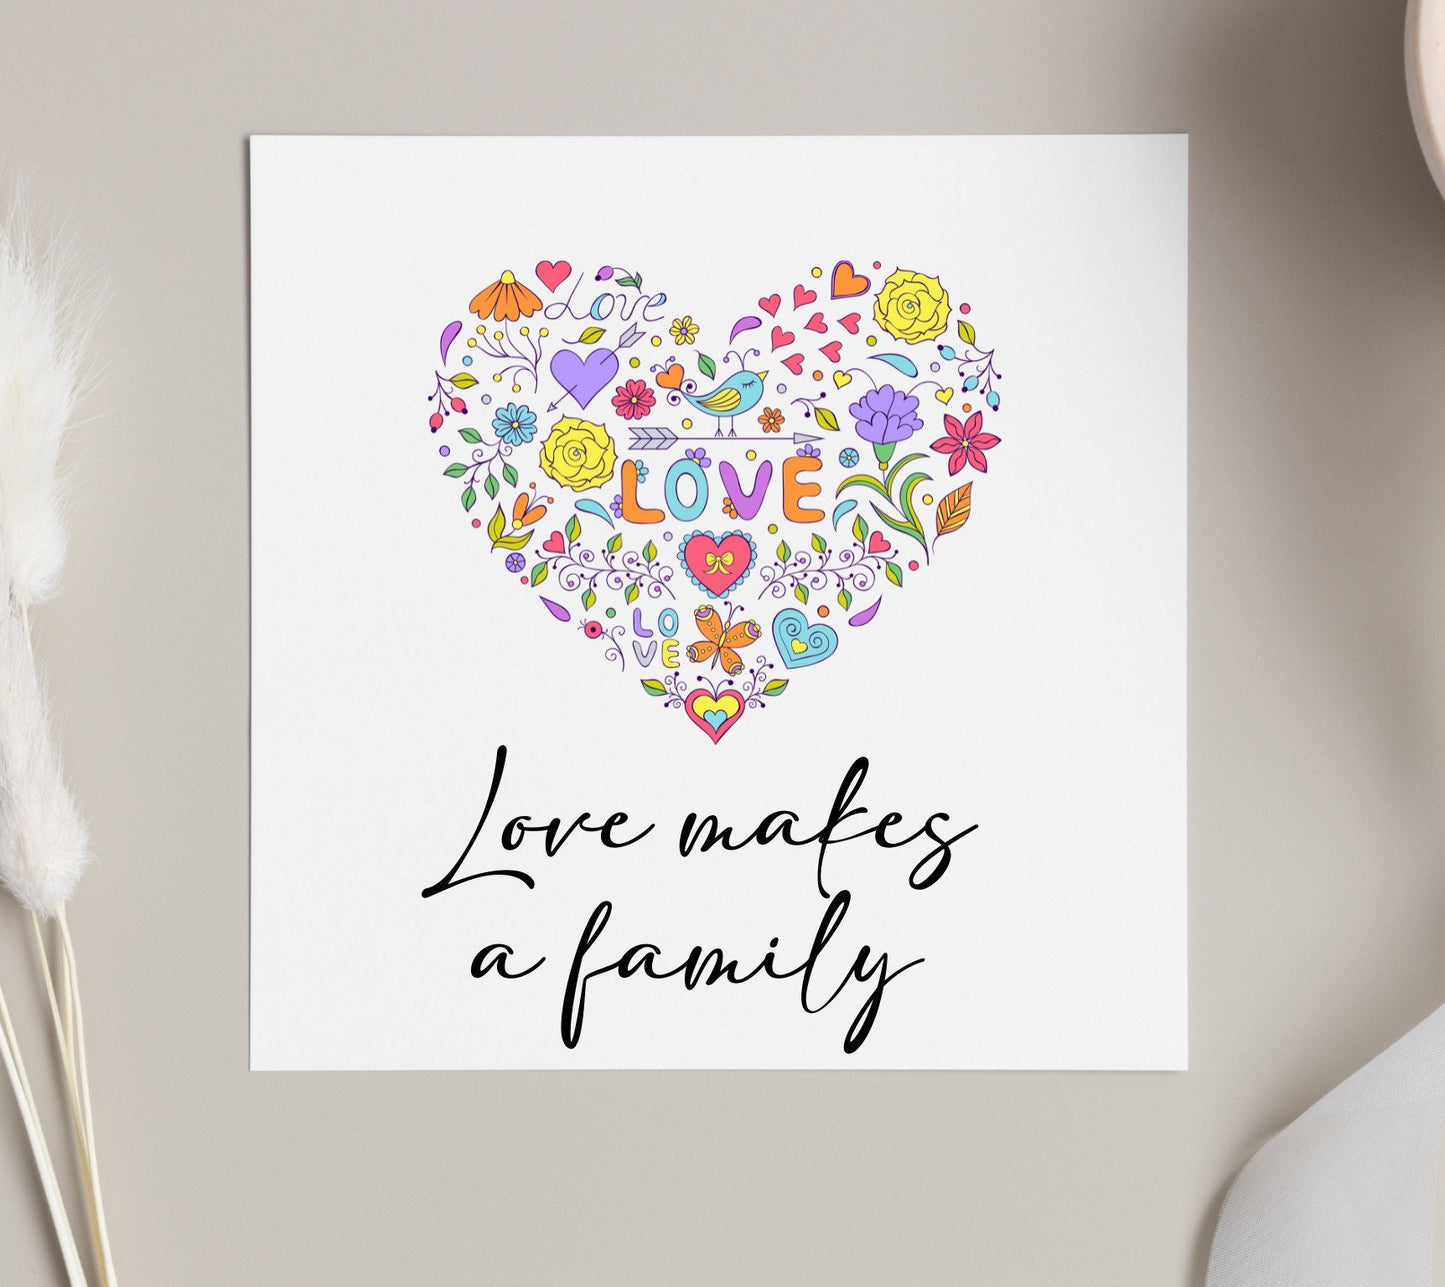 Love makes a family, adoption cards, congrats on adoption, happy adoption day, adoptive family cards, adopted child cards